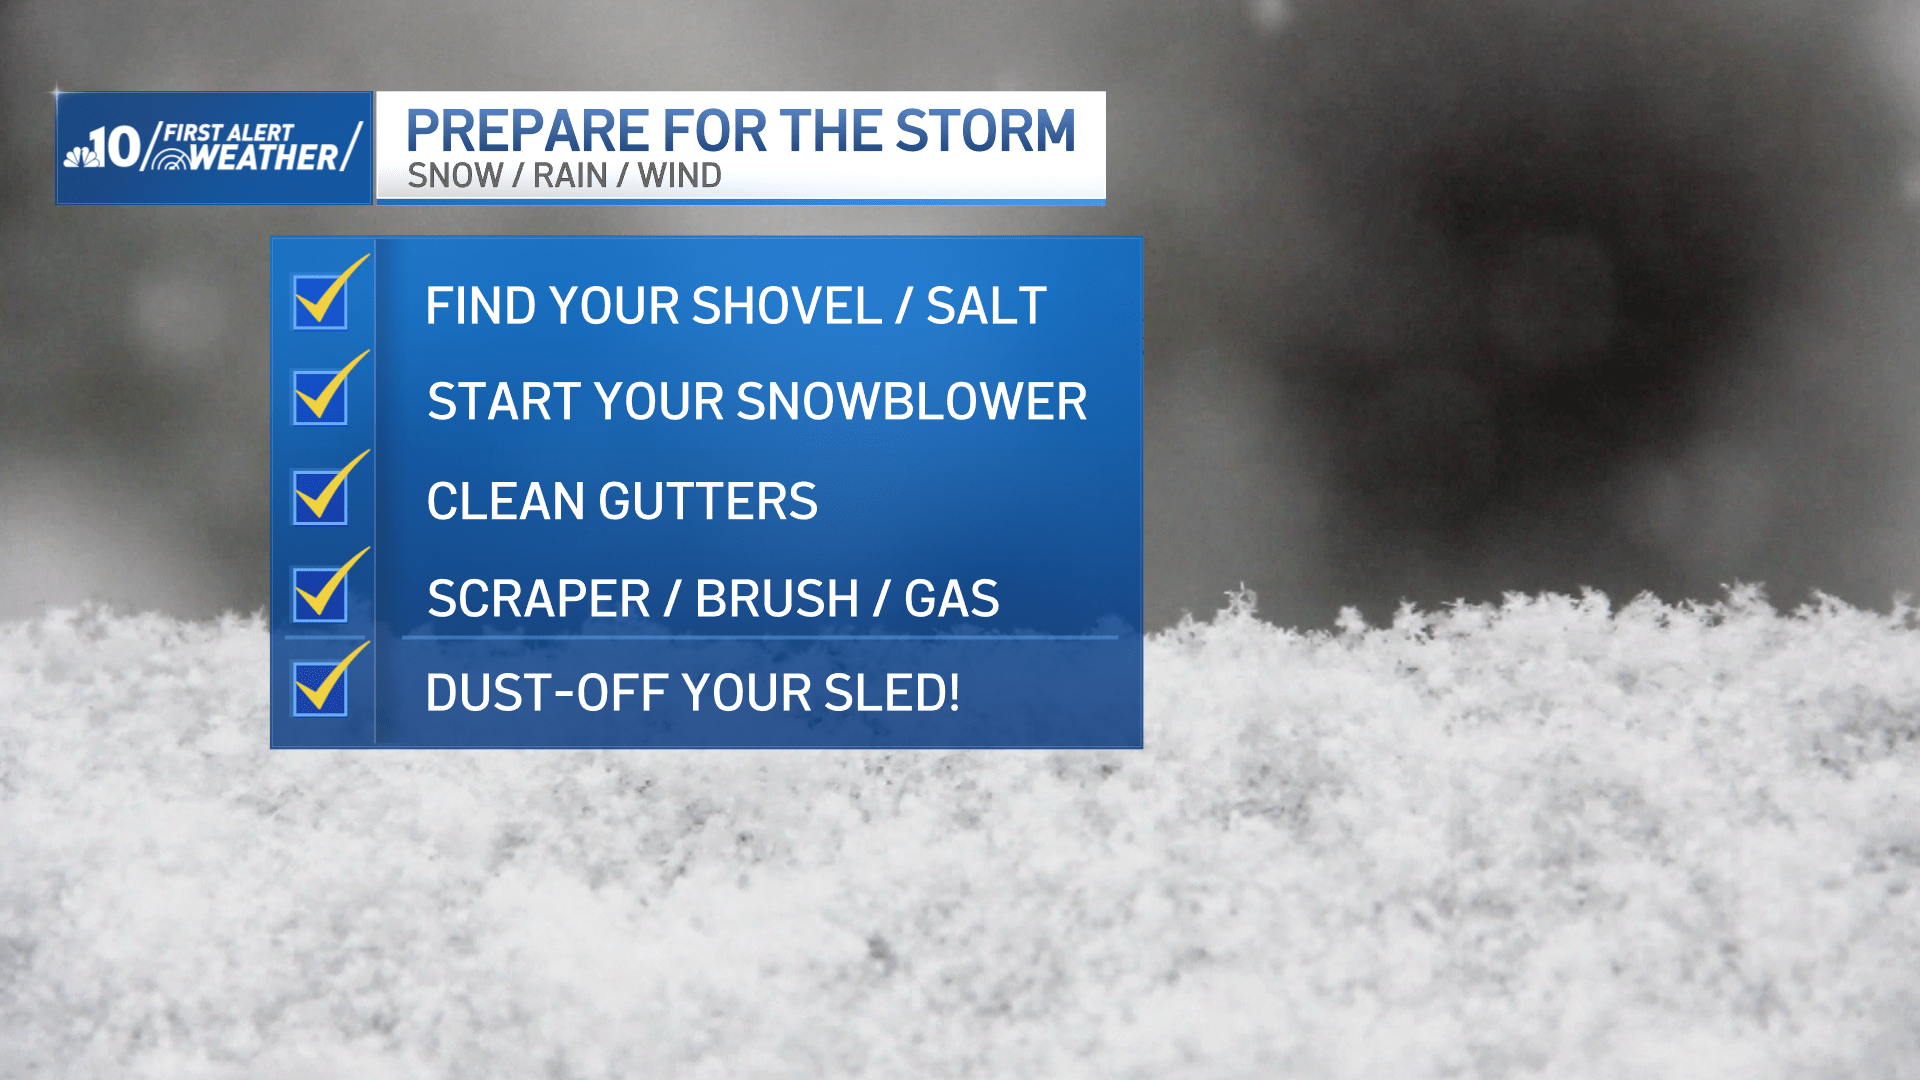 Graphic shows the checklist of items ahead of possible January 2024 snow.